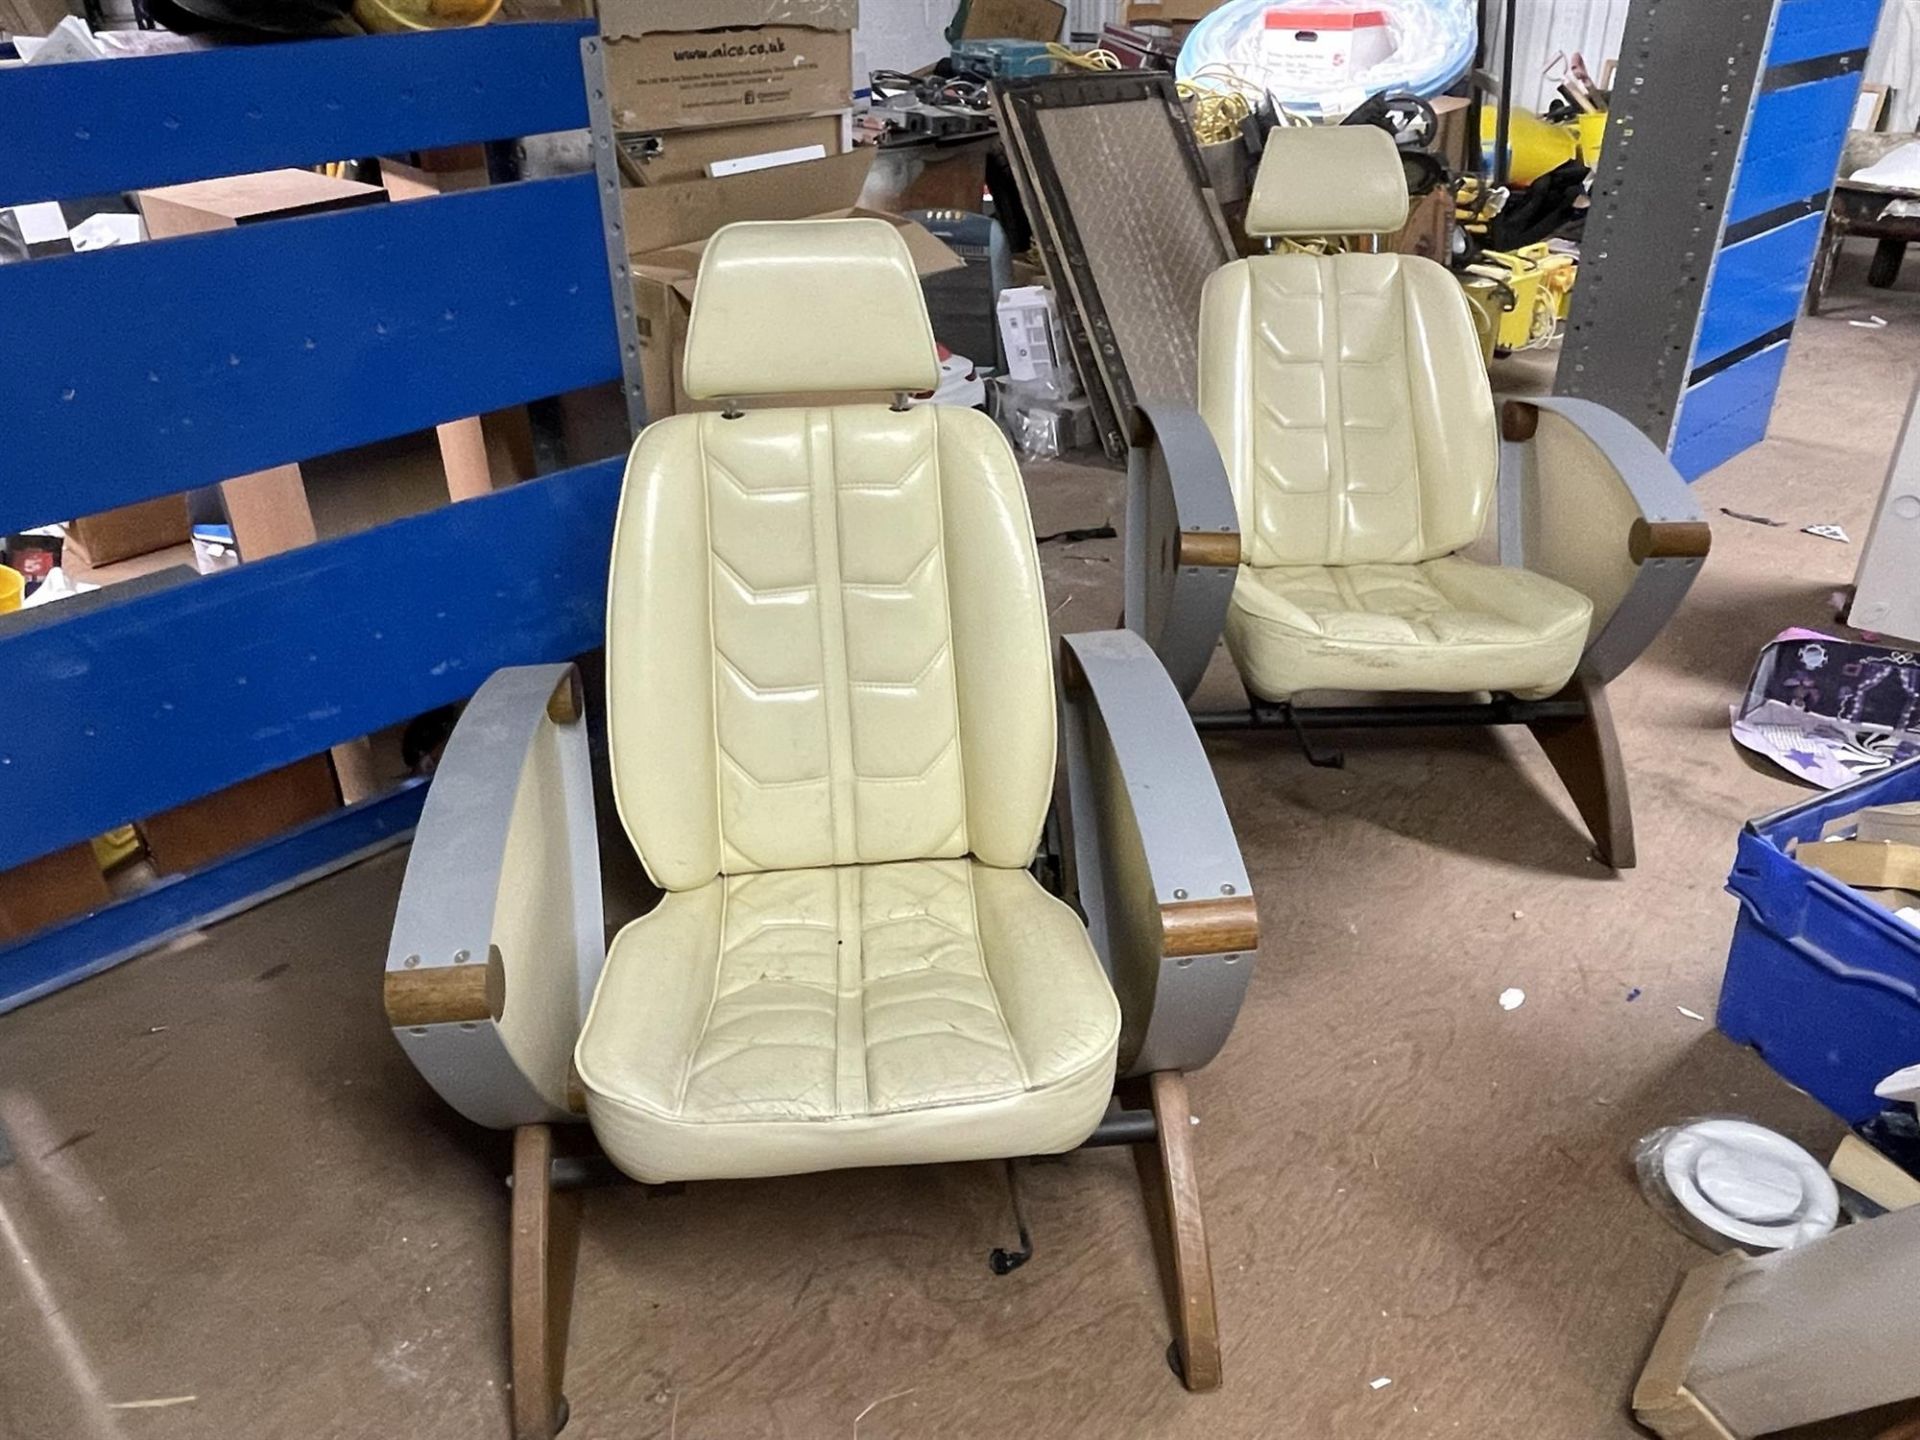 Pair of Ferrari 308 Crema Leather Seats on Substantial Bases - Image 9 of 10